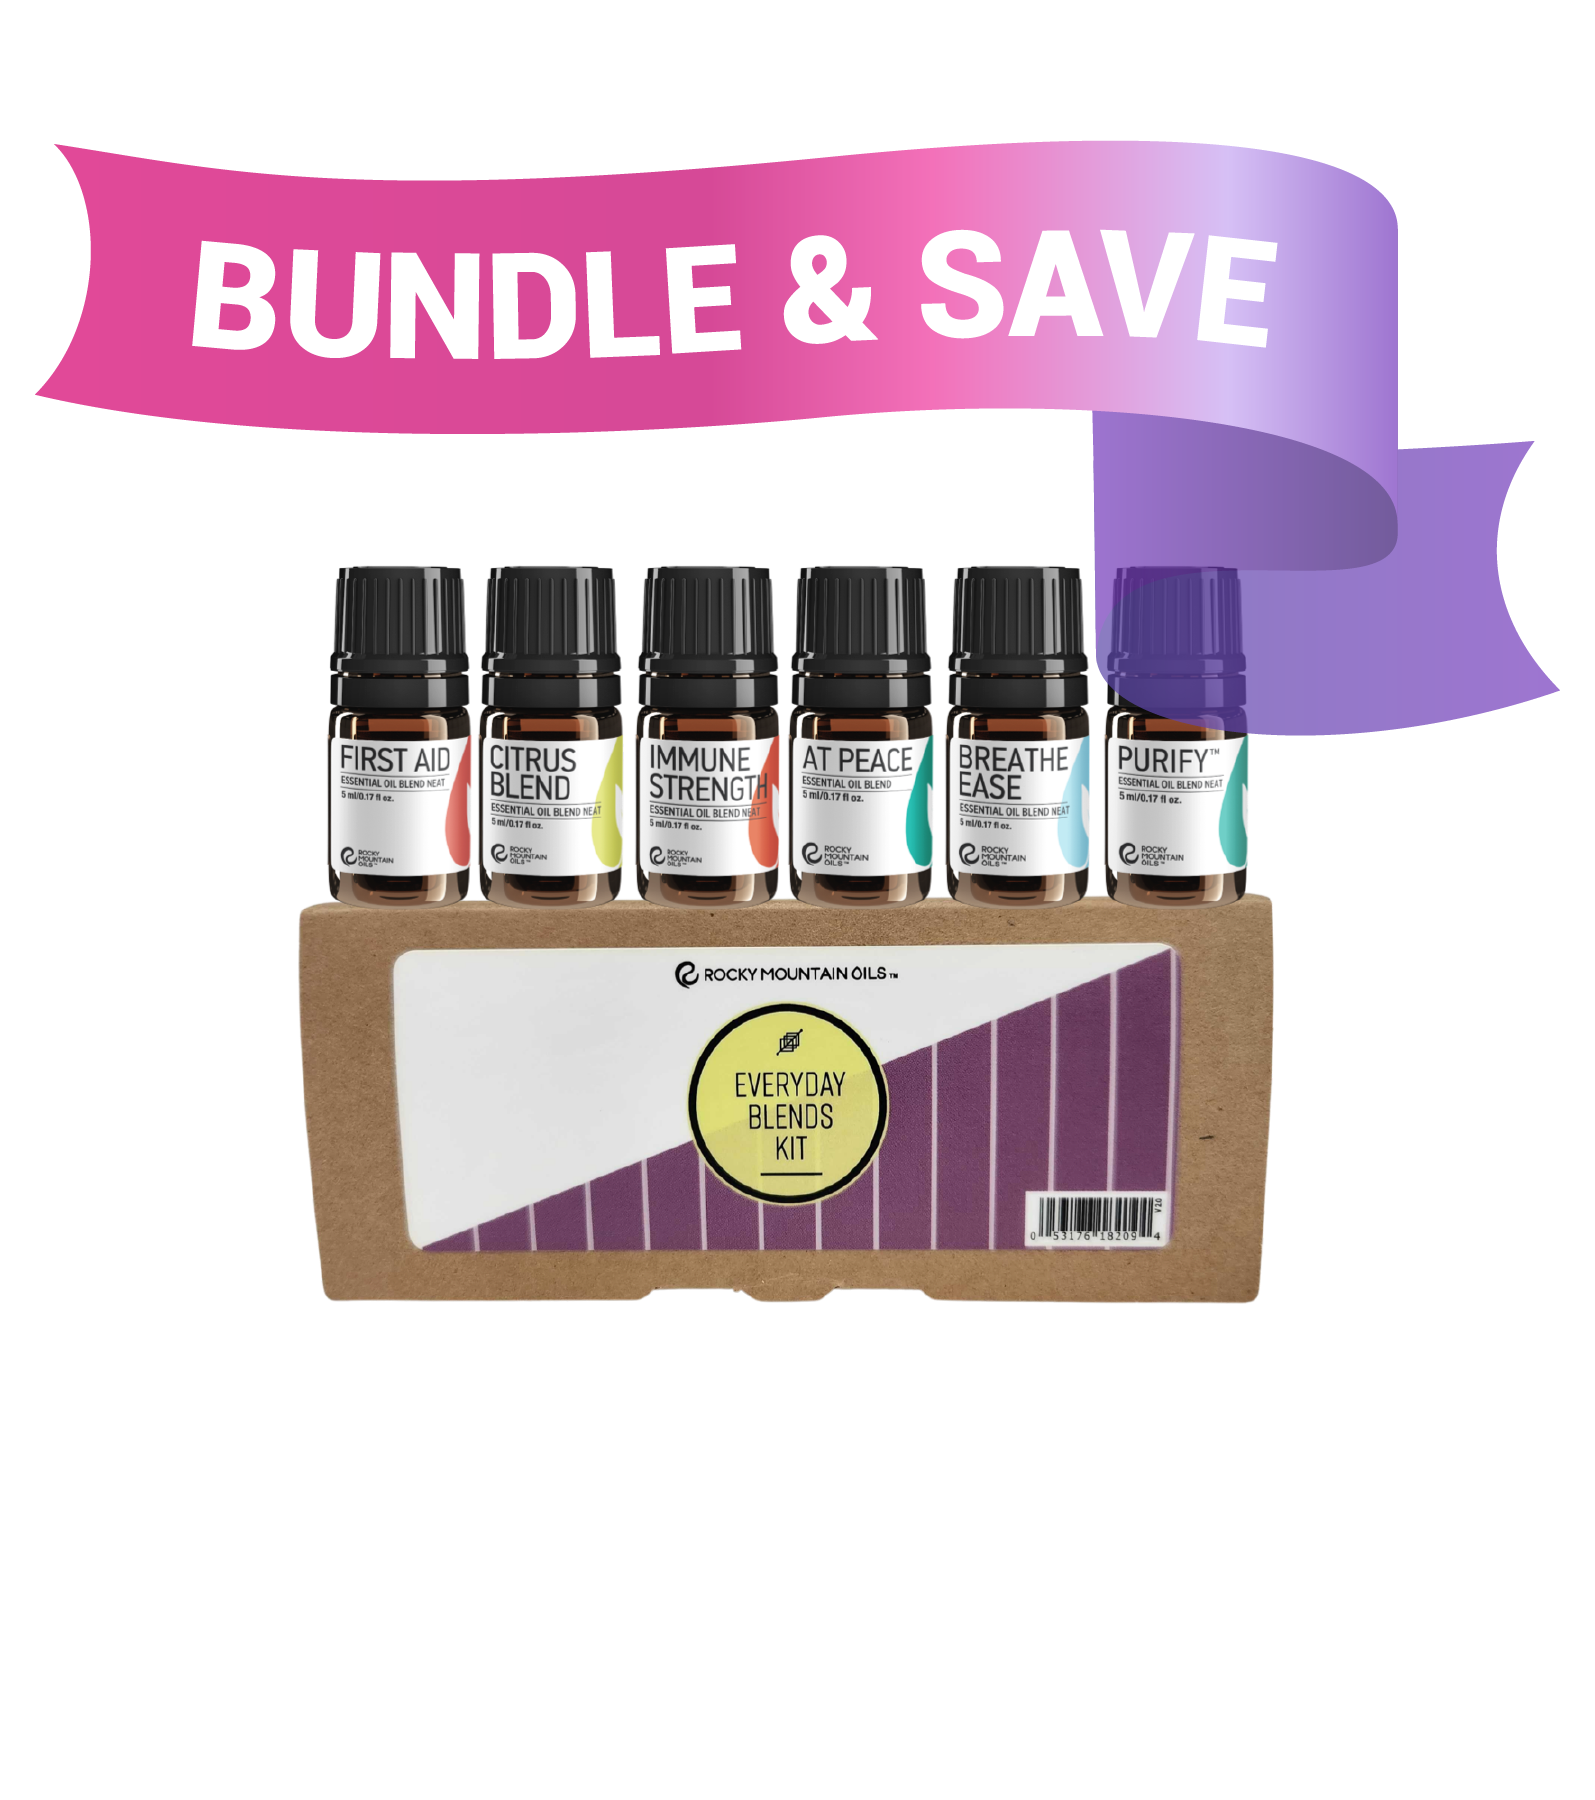 Winter Essential Oil Diffuser Blends – Rocky Mountain Oils